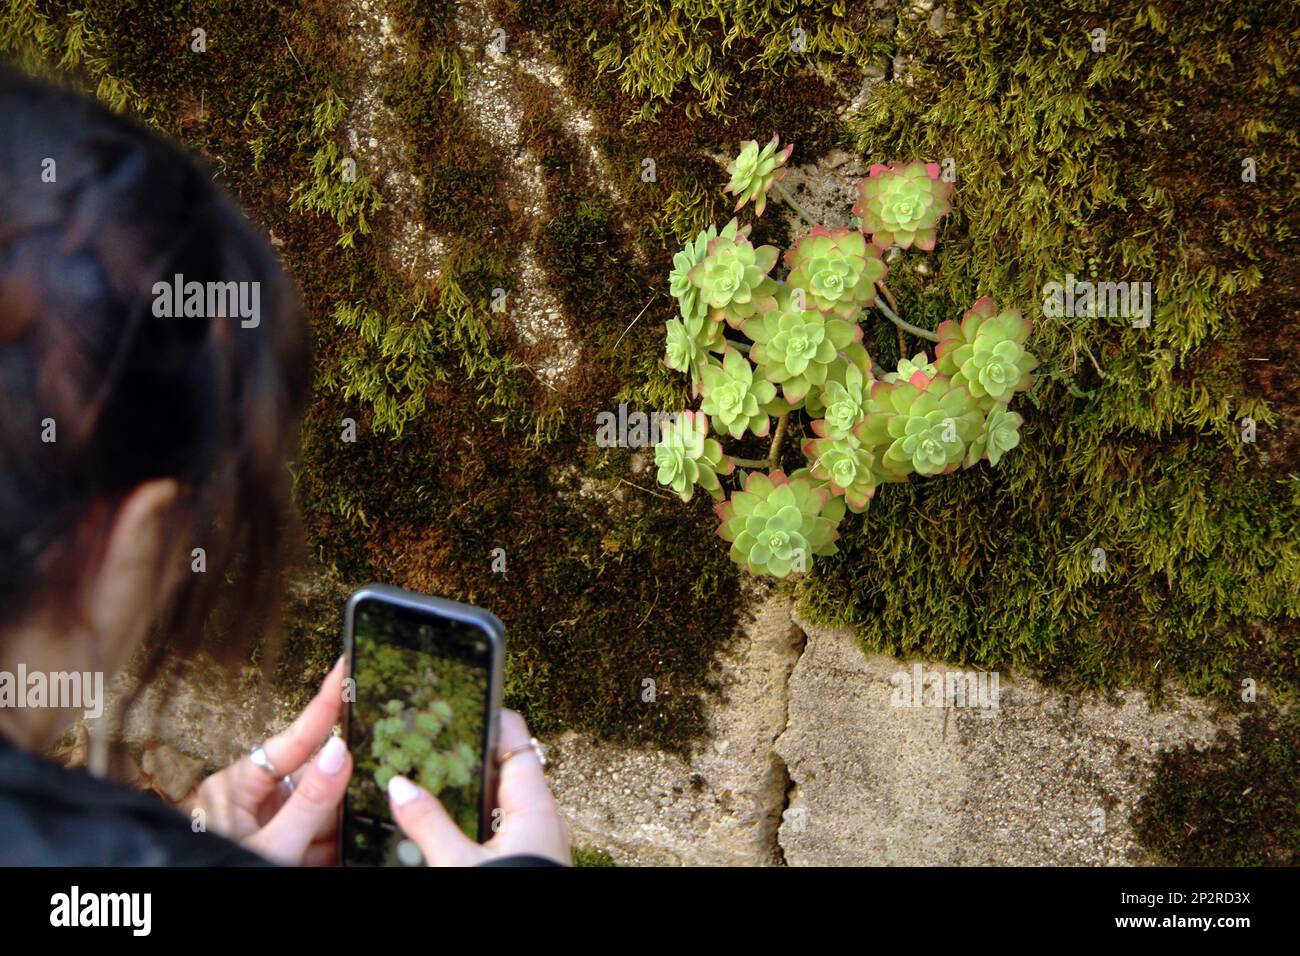 Woman taking a photo of a Pinwheel Aeonium succulent growing on a moss-covered wall in Italy Stock Photo